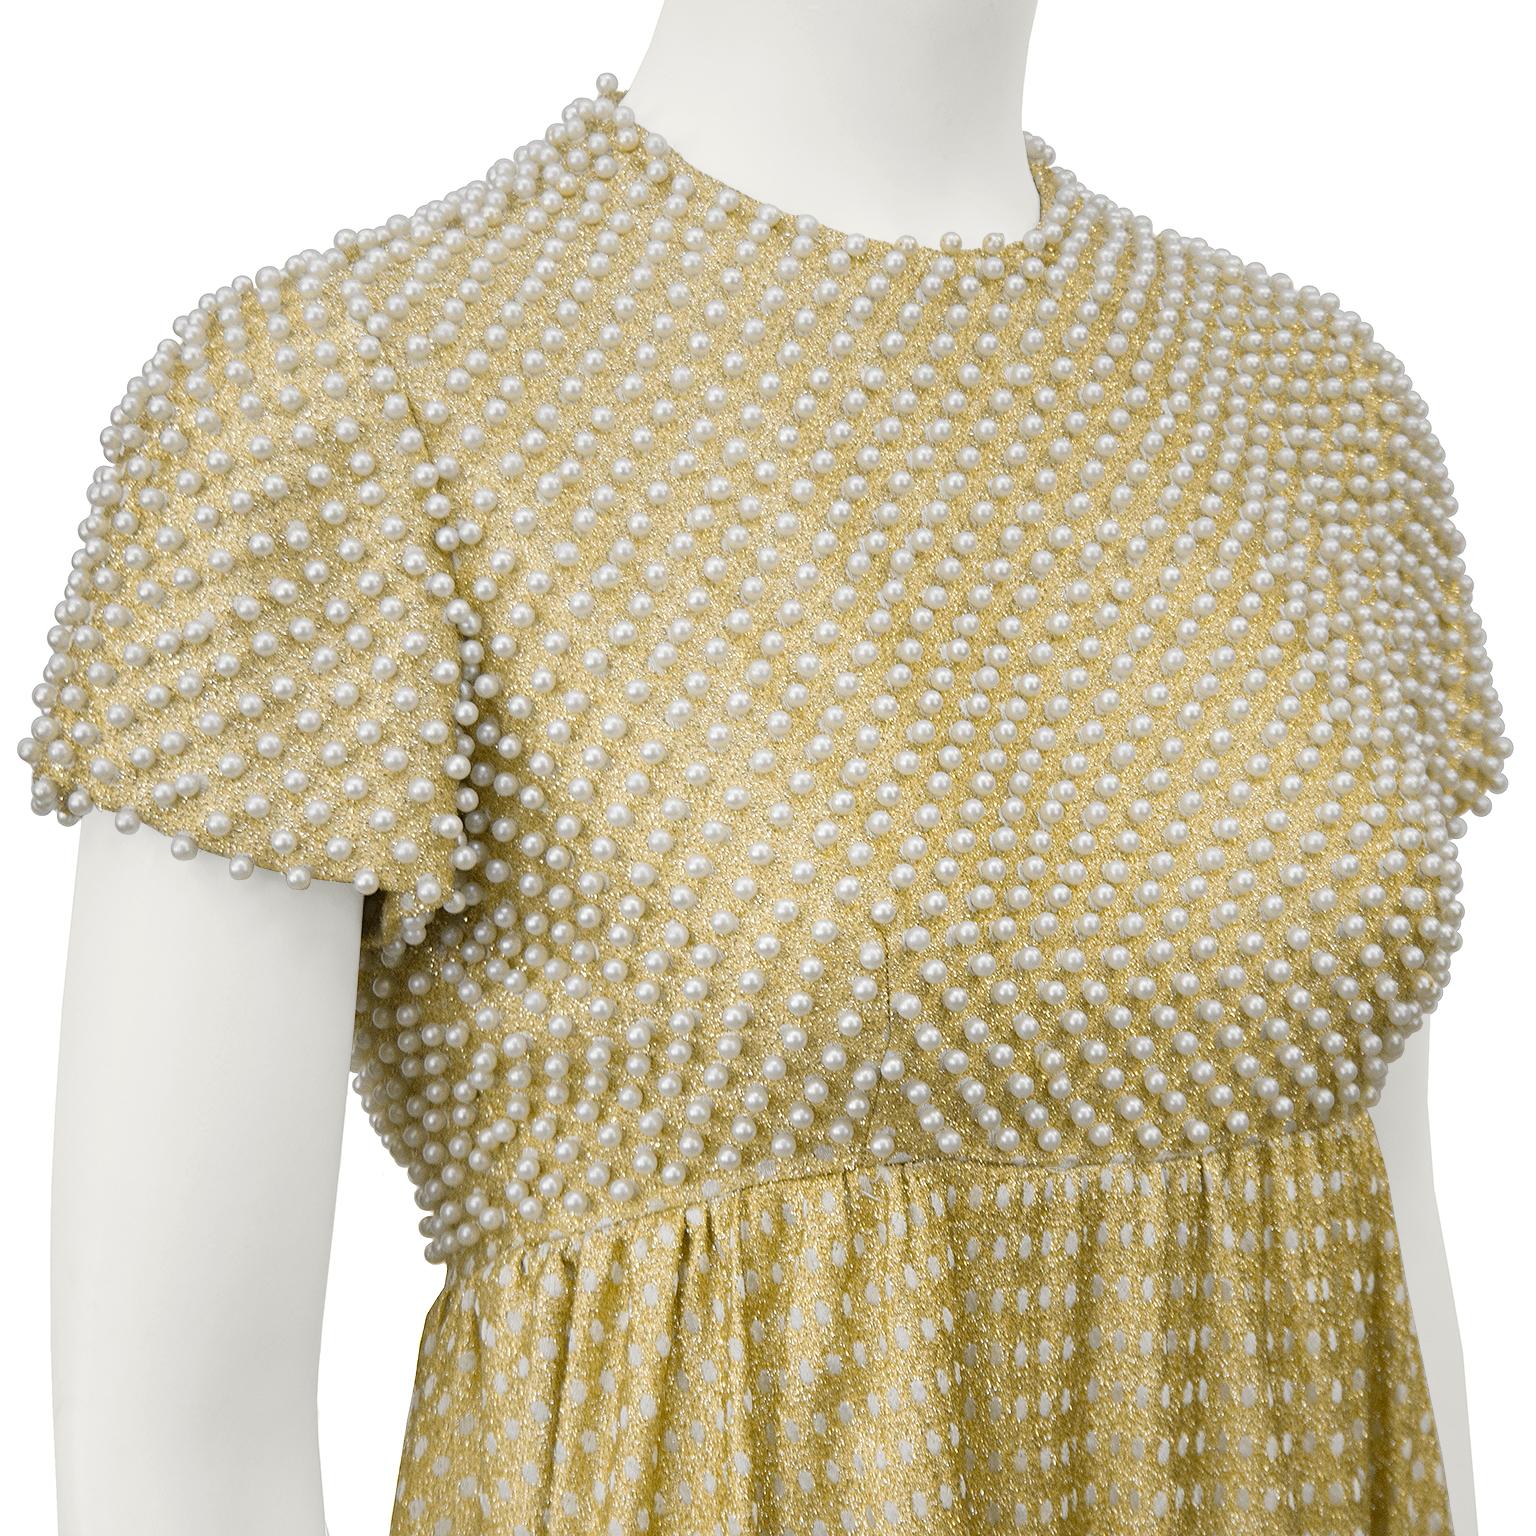 1970's Geoffrey Beene Gold Metallic Knit Dress w Pearls In Excellent Condition For Sale In Toronto, Ontario